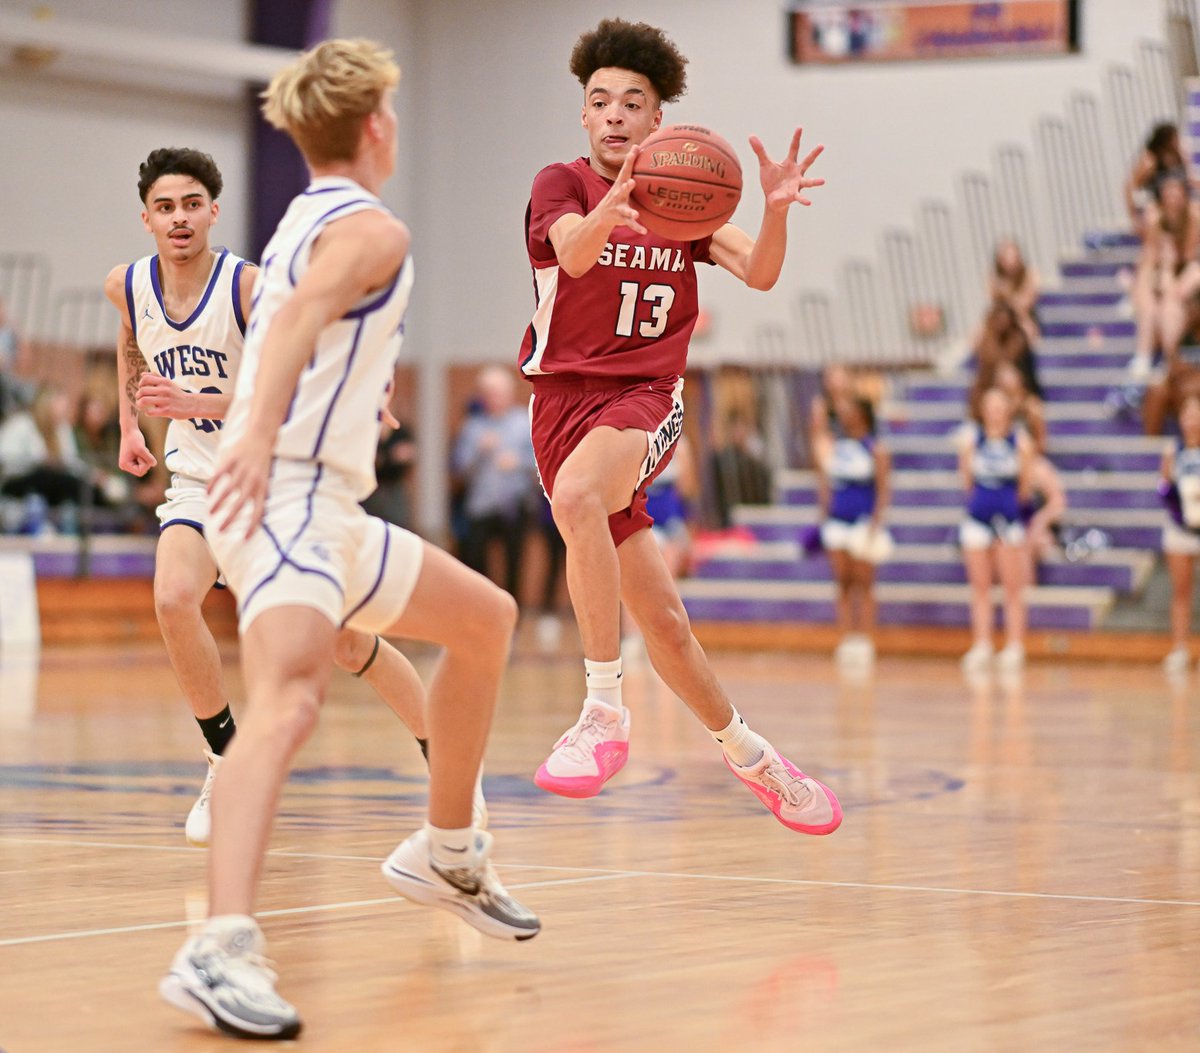 Game recap: @SeamanBoysBball rallies down the stretch for 76-74 UKC win over Piper. Sophomore KaeVon Bonner scores 27 points to lead Vikings, including game-winning free throws. ... topsports.news/news/seaman-bo…